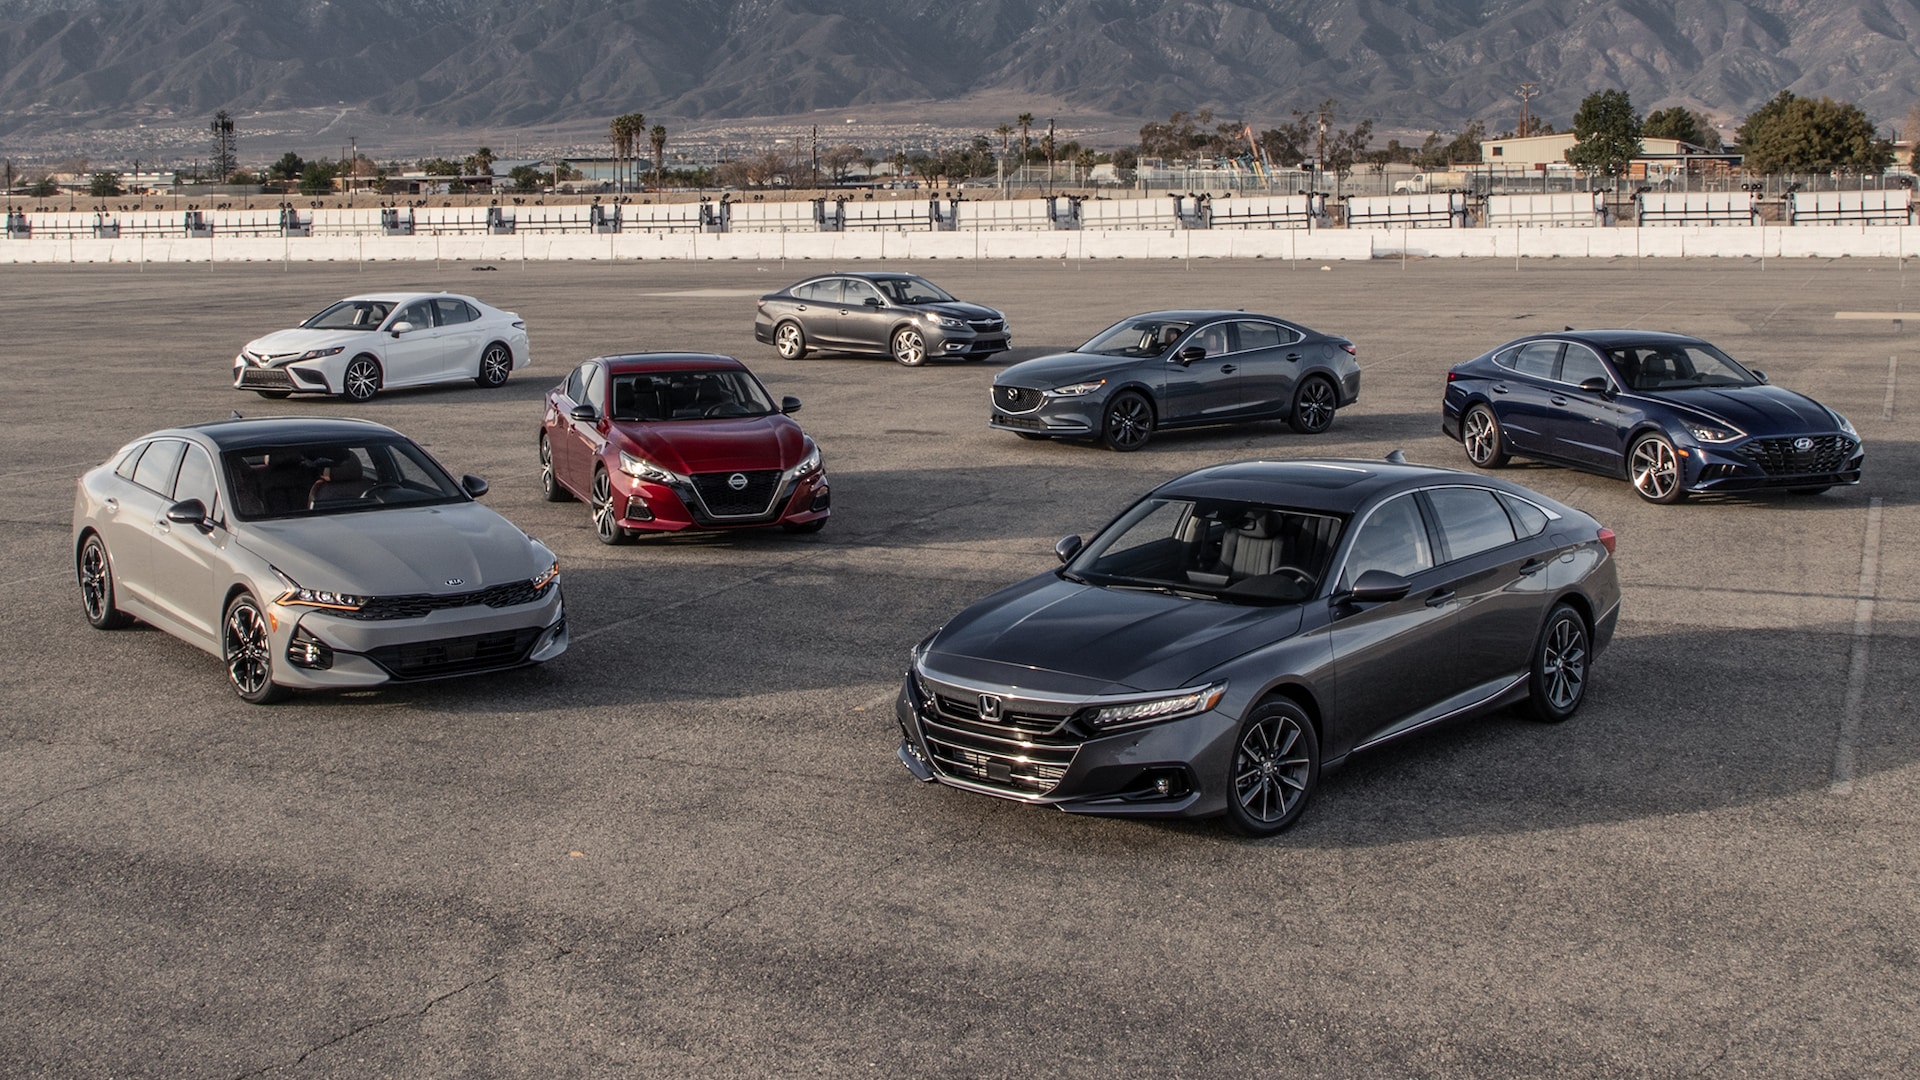 Nissan Maxima Vs Mazda 6: A Battle of Performance and Style